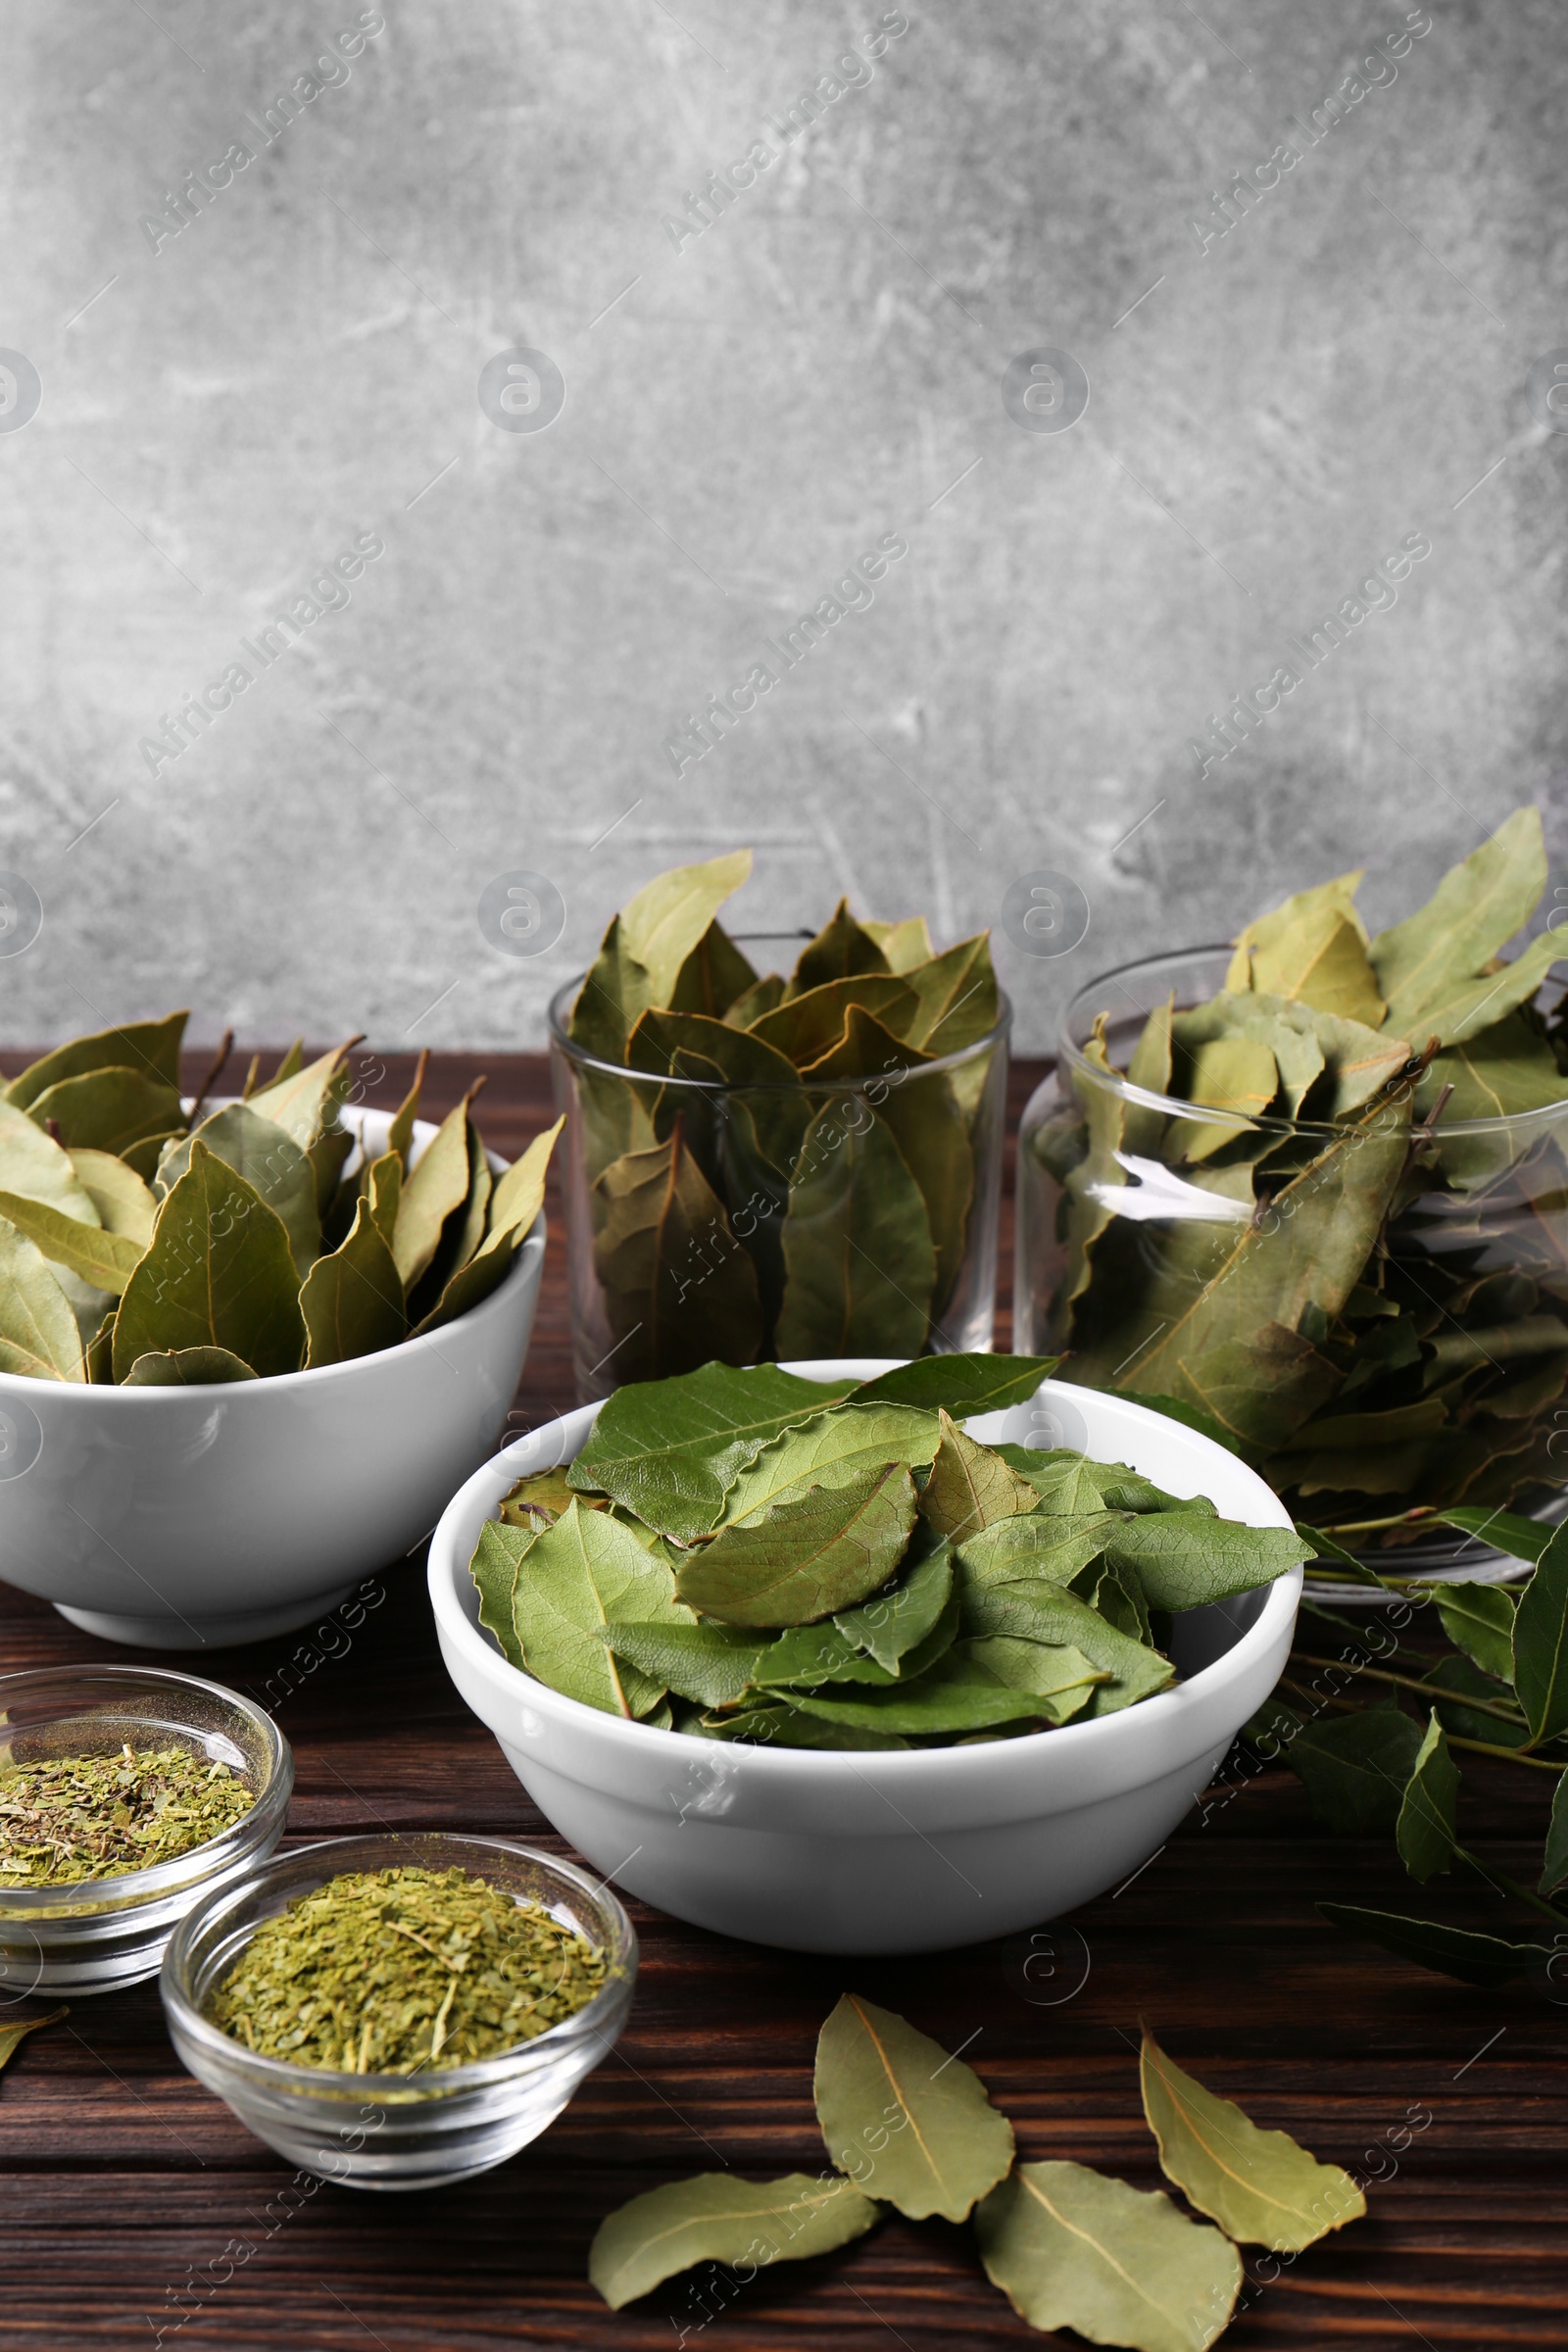 Photo of Bowls with ground, fresh and dry bay leaves on wooden table